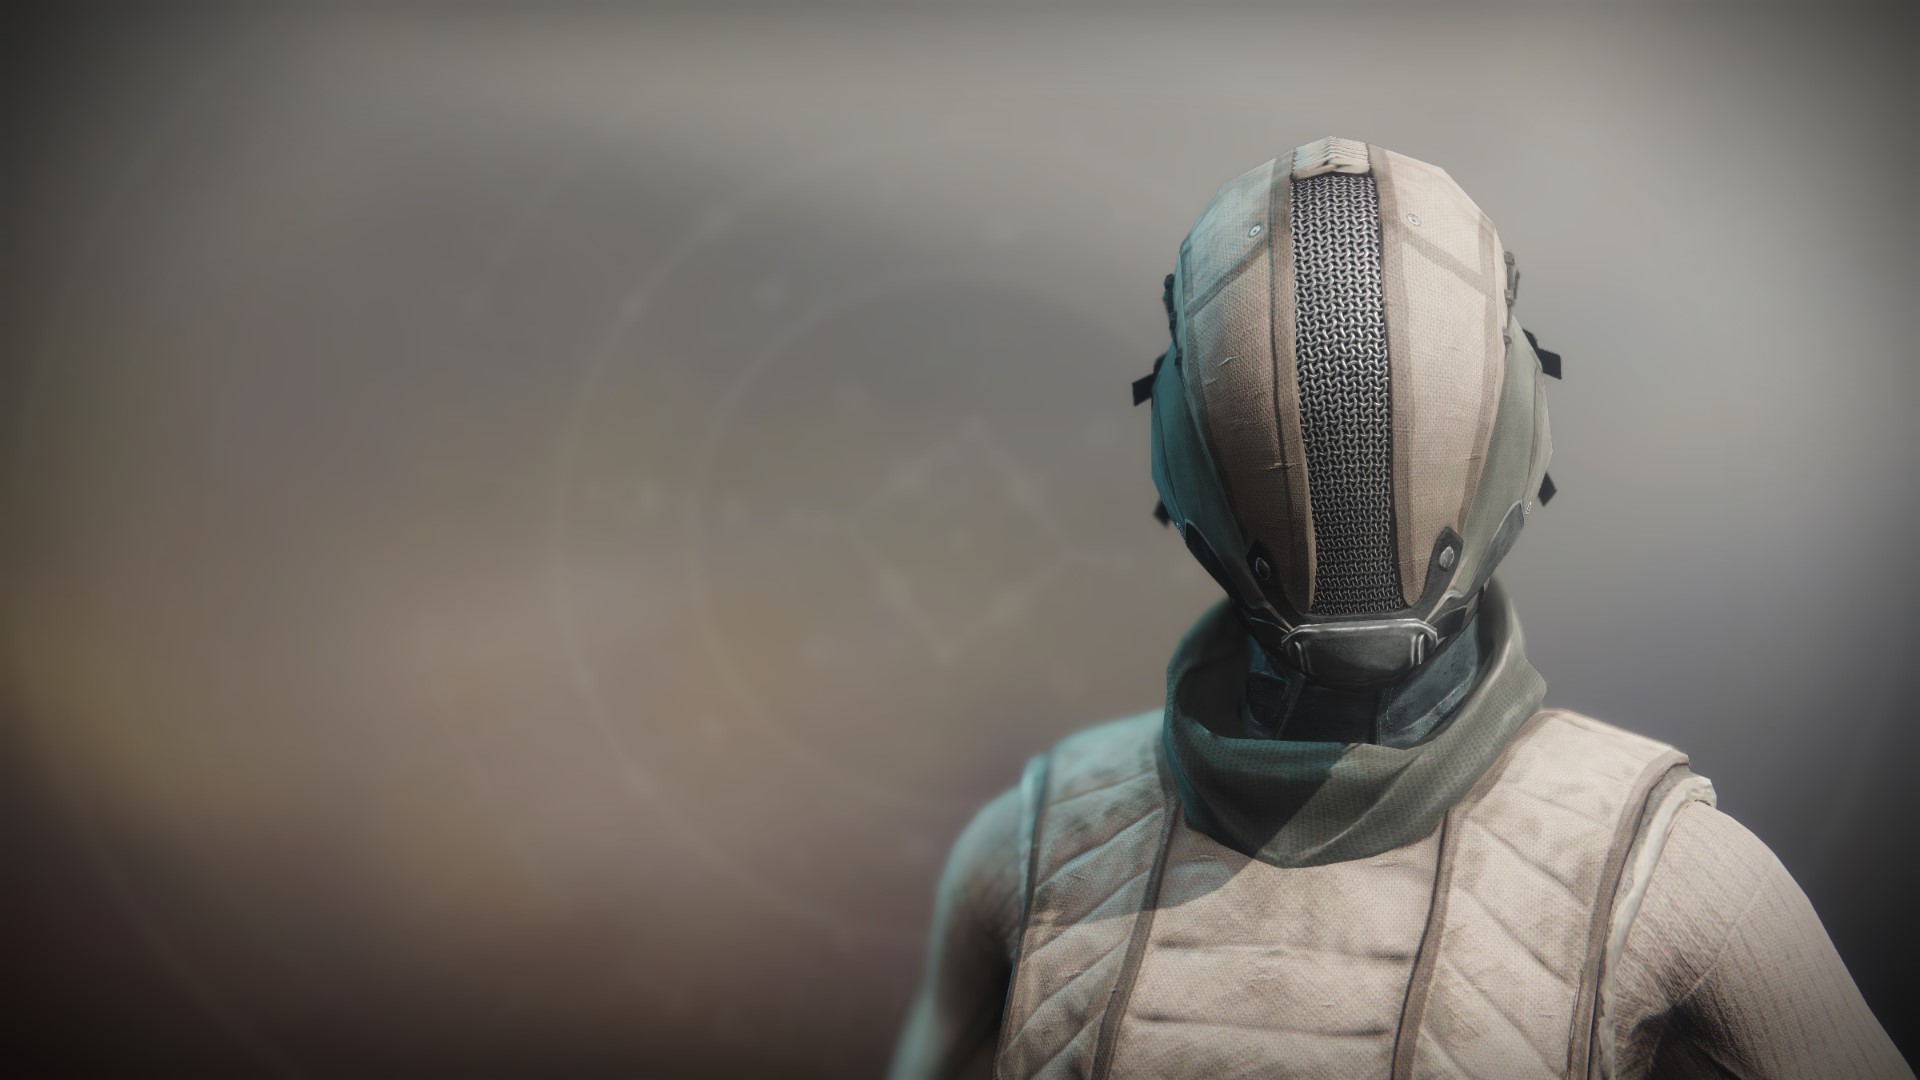 An in-game render of the Refugee Helm.